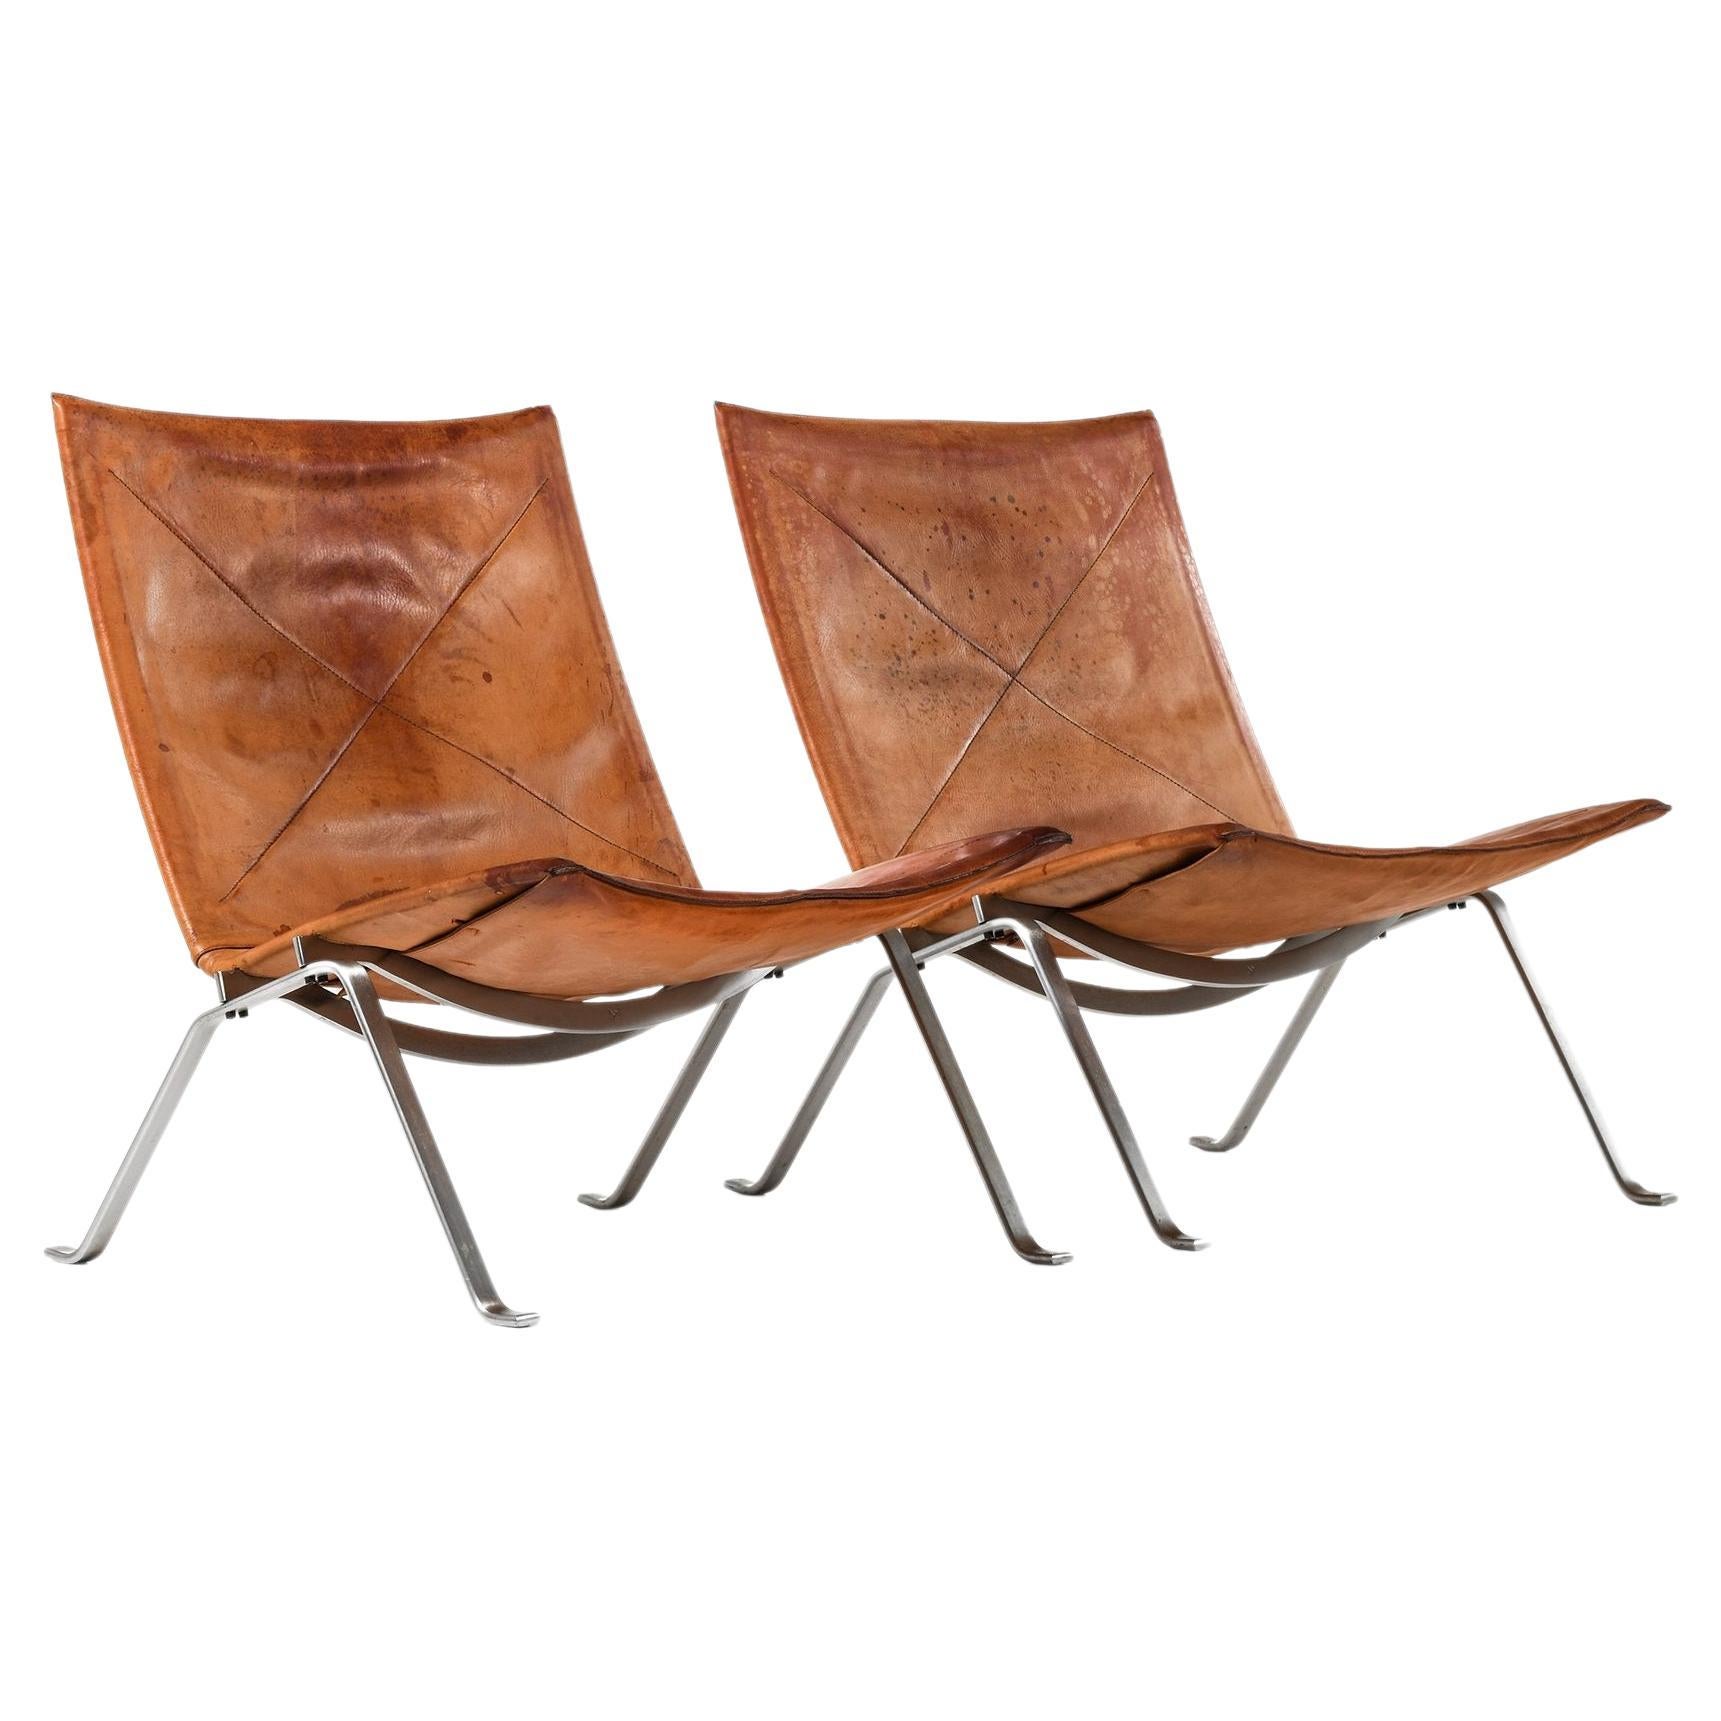 Pair of Easy Chairs in Original Leather and Steel by Poul Kjærholm, 1950s